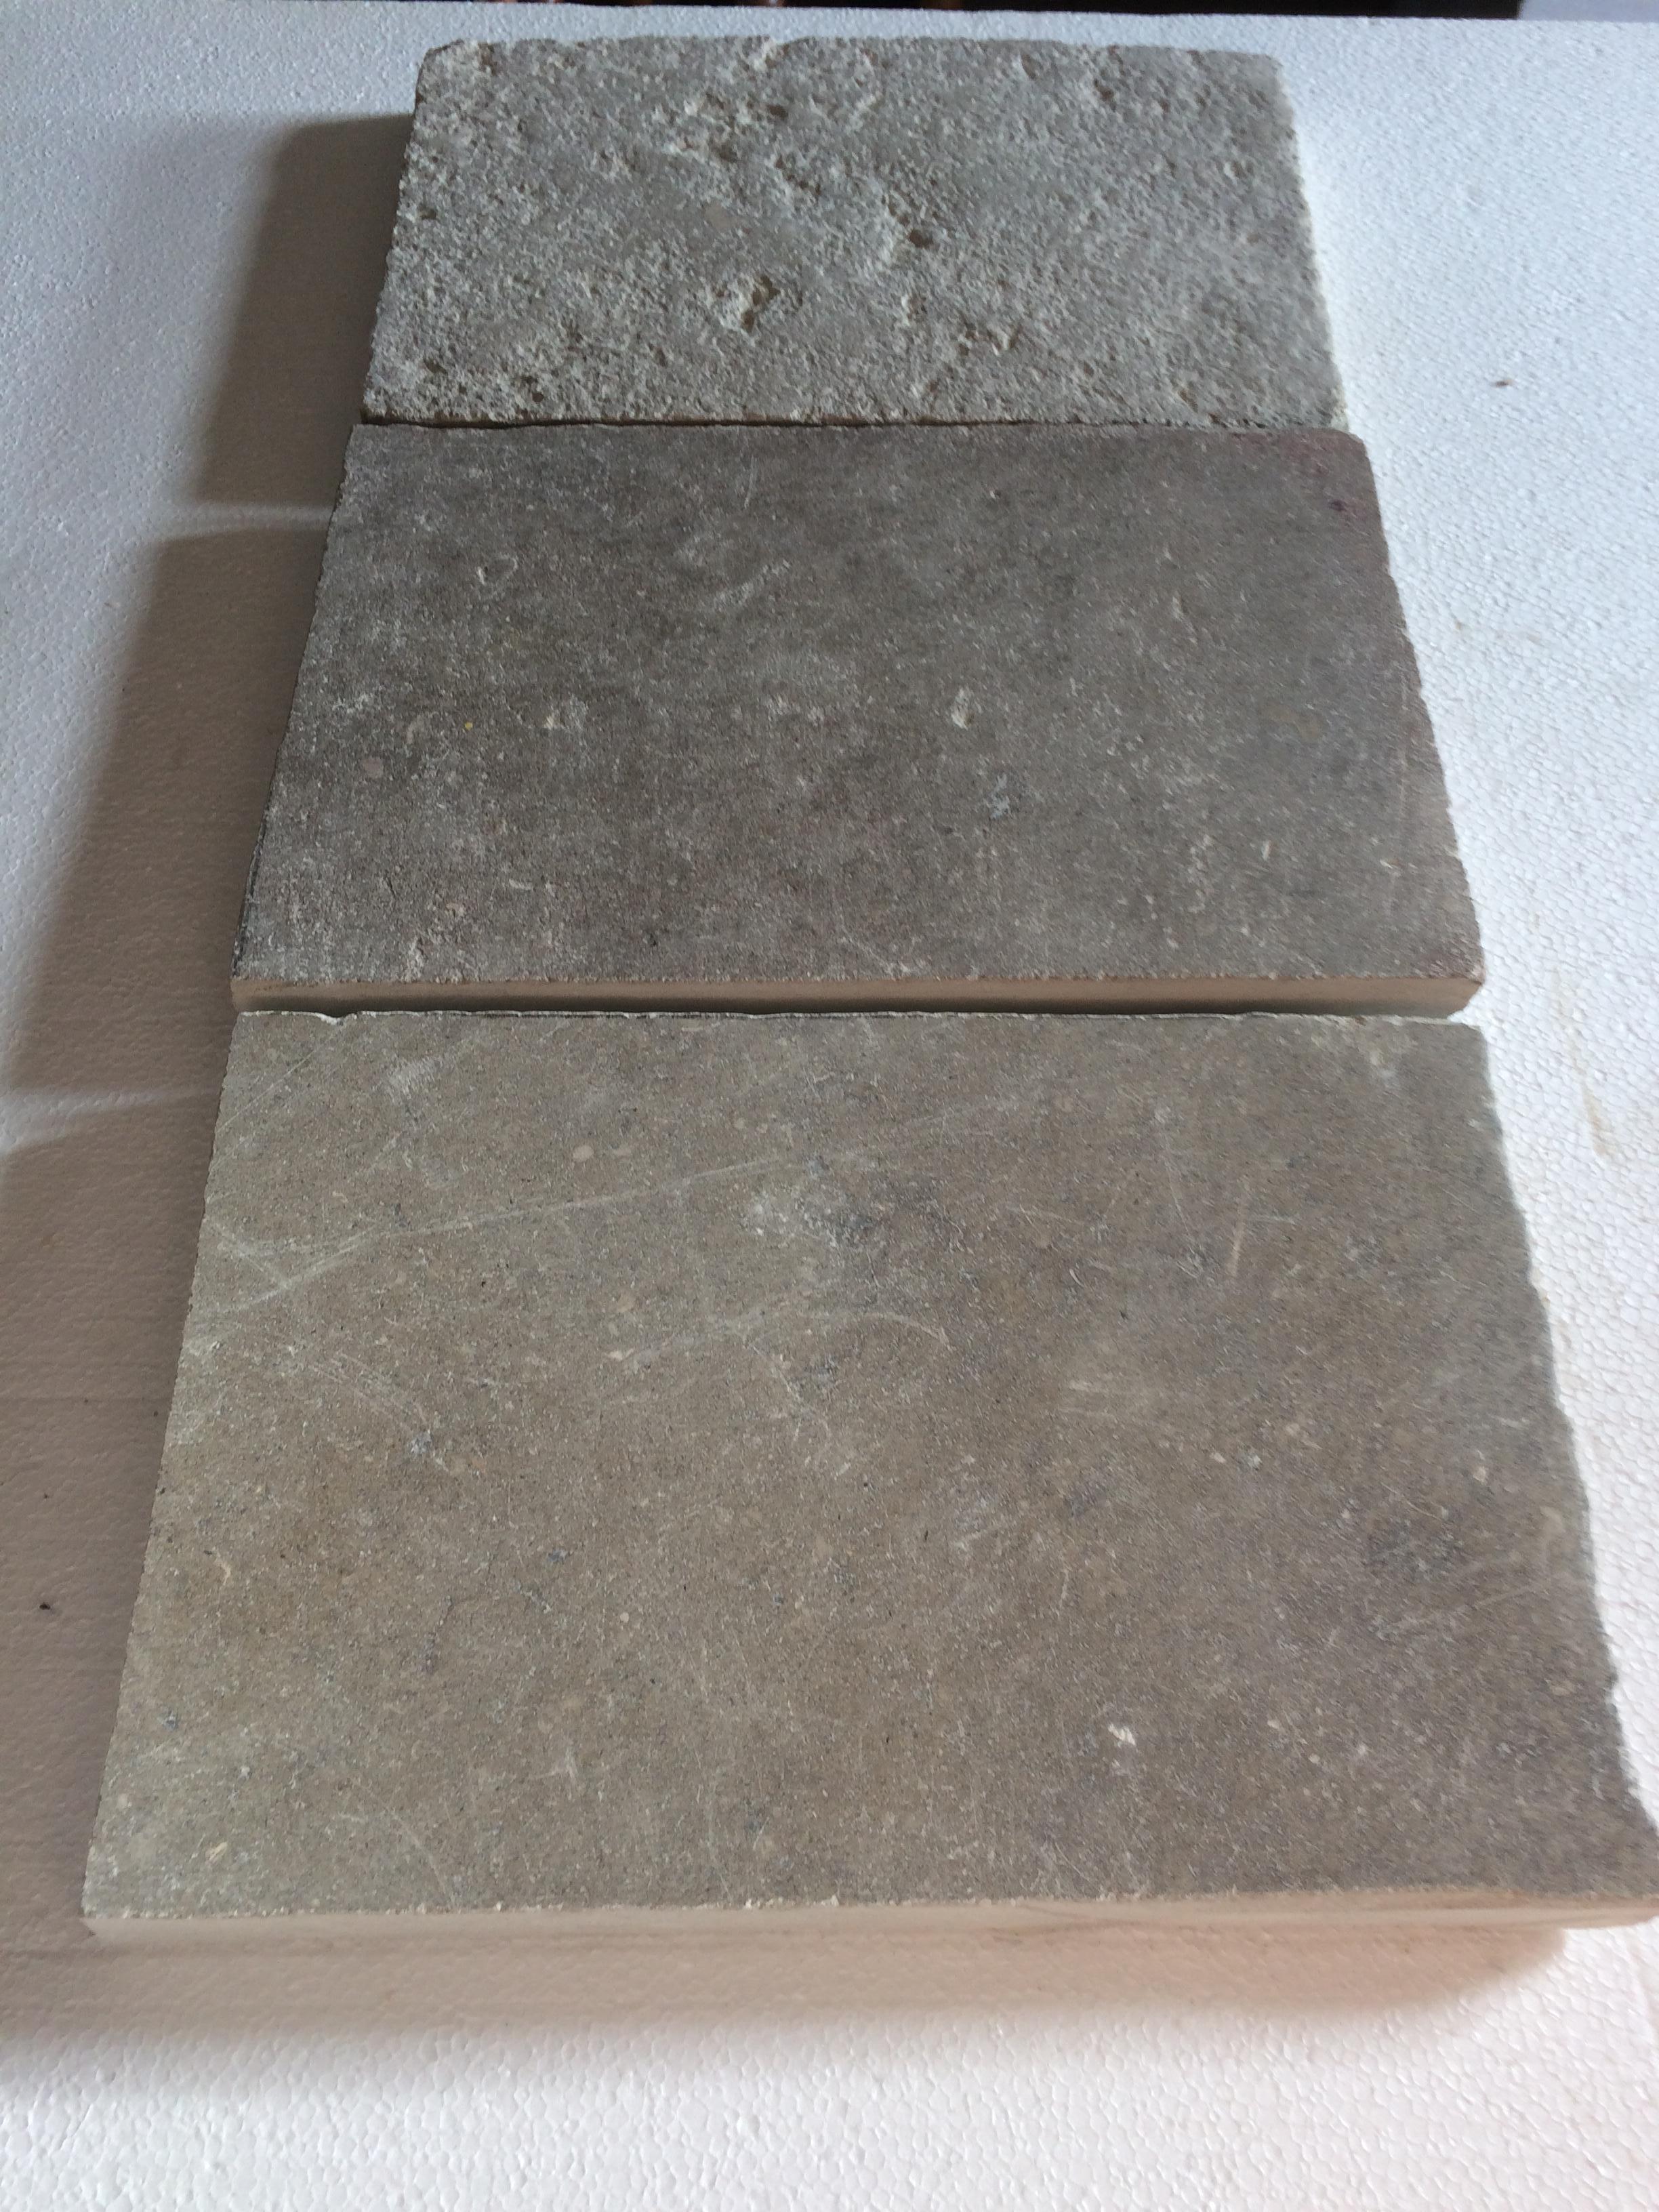 French Antique Gray Barre Monptelier limestone flooring, authentic and original 18th century from South of France.
Rare and unique, in excellent condition, ready for installation as it is.
All pieces at same thickness 1.25 inches, random length and